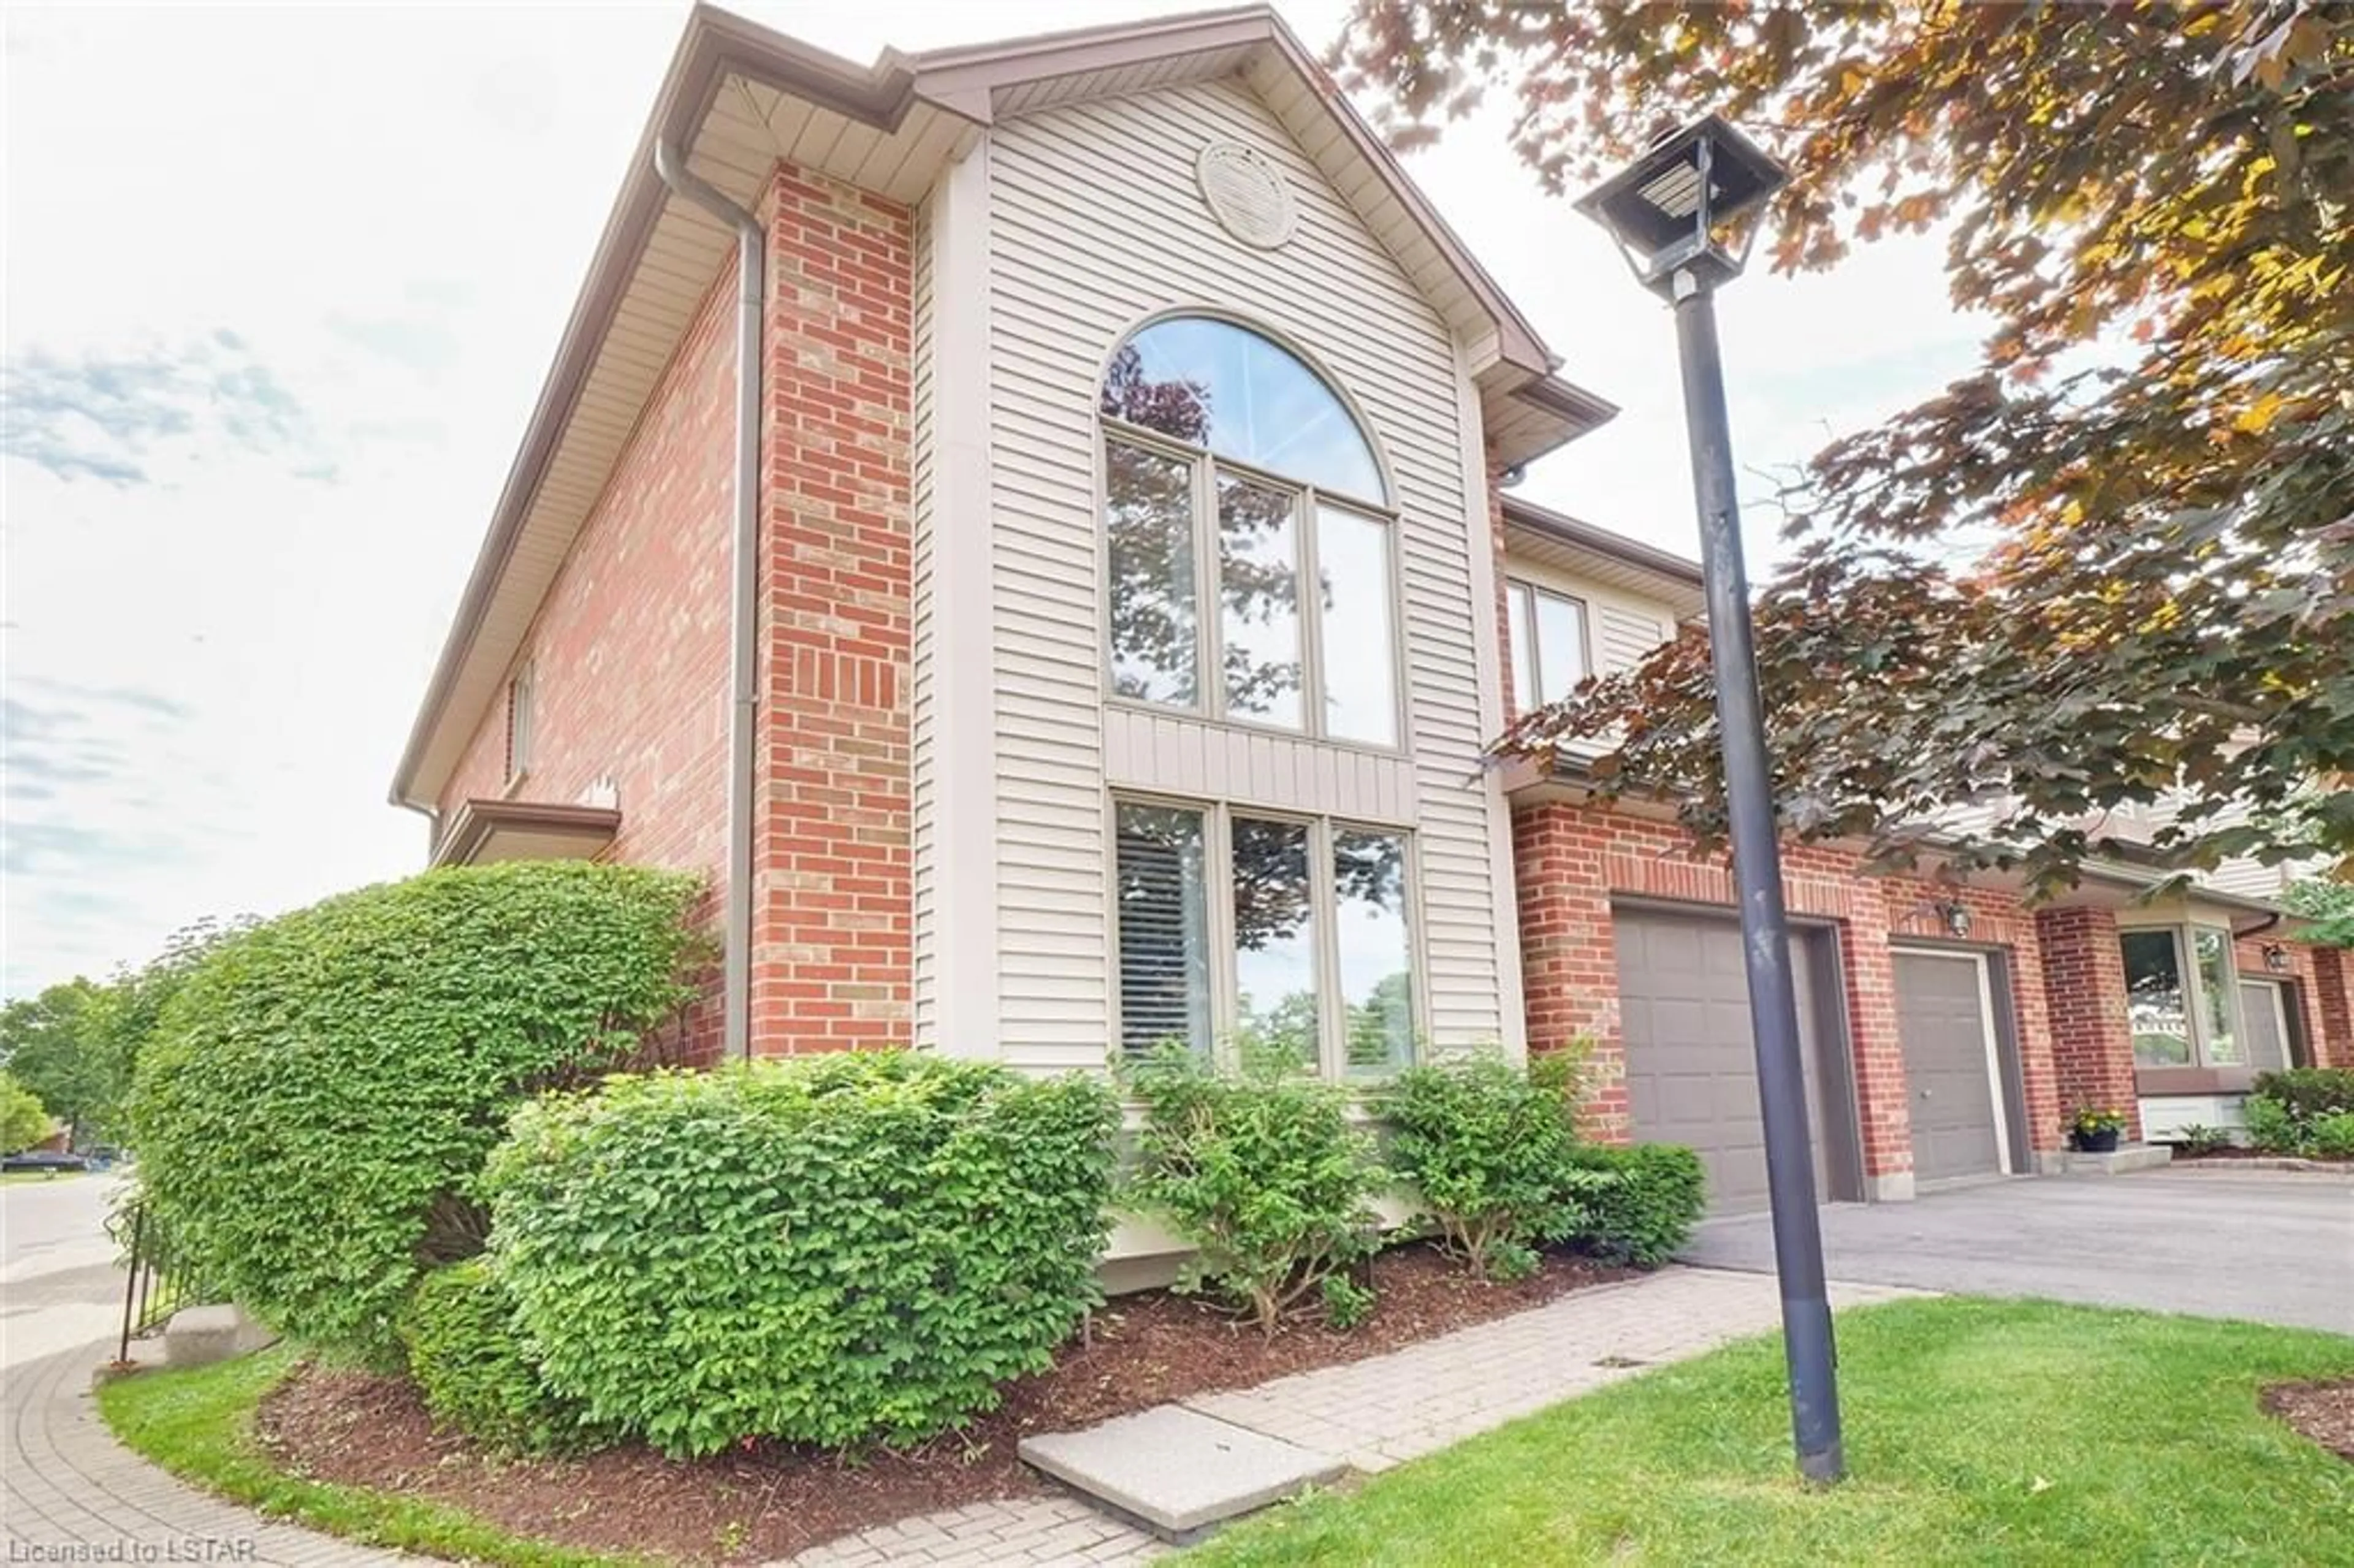 Home with brick exterior material for 1478 Adelaide St #27, London Ontario N5X 3Y1